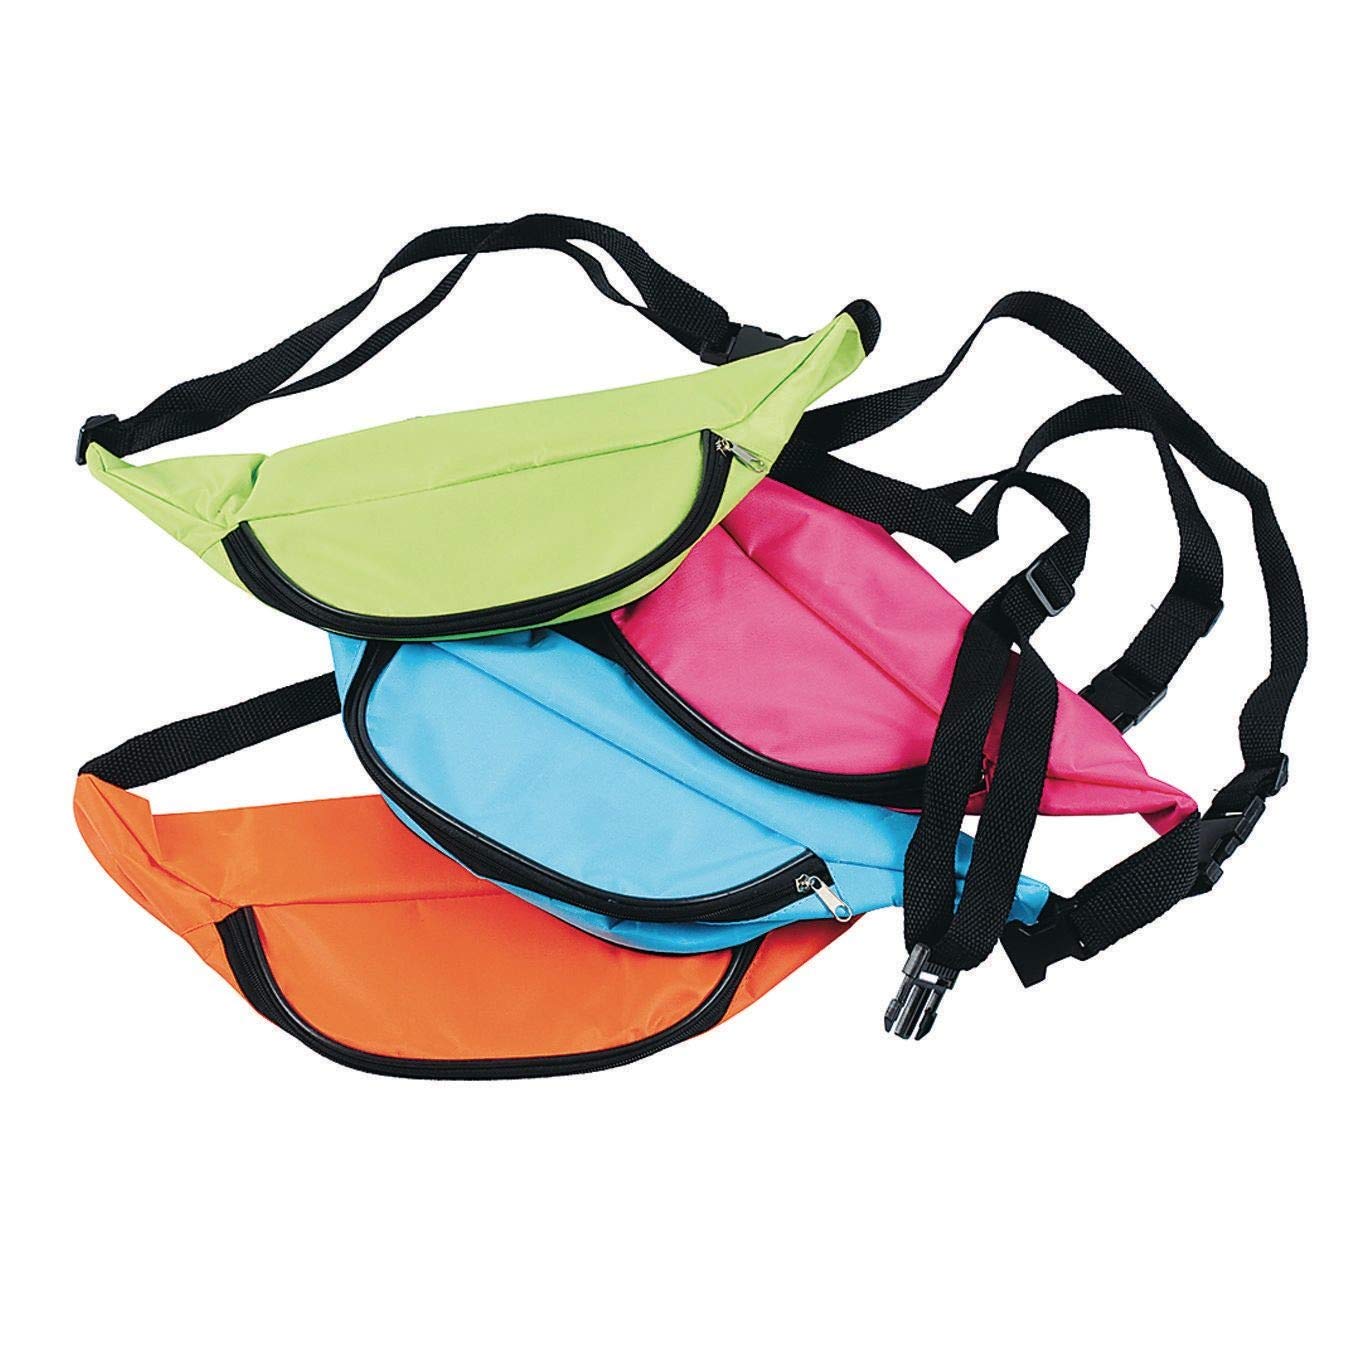 U.S. Toy Assorted Neon Color Adjustable Fanny Packs (12)